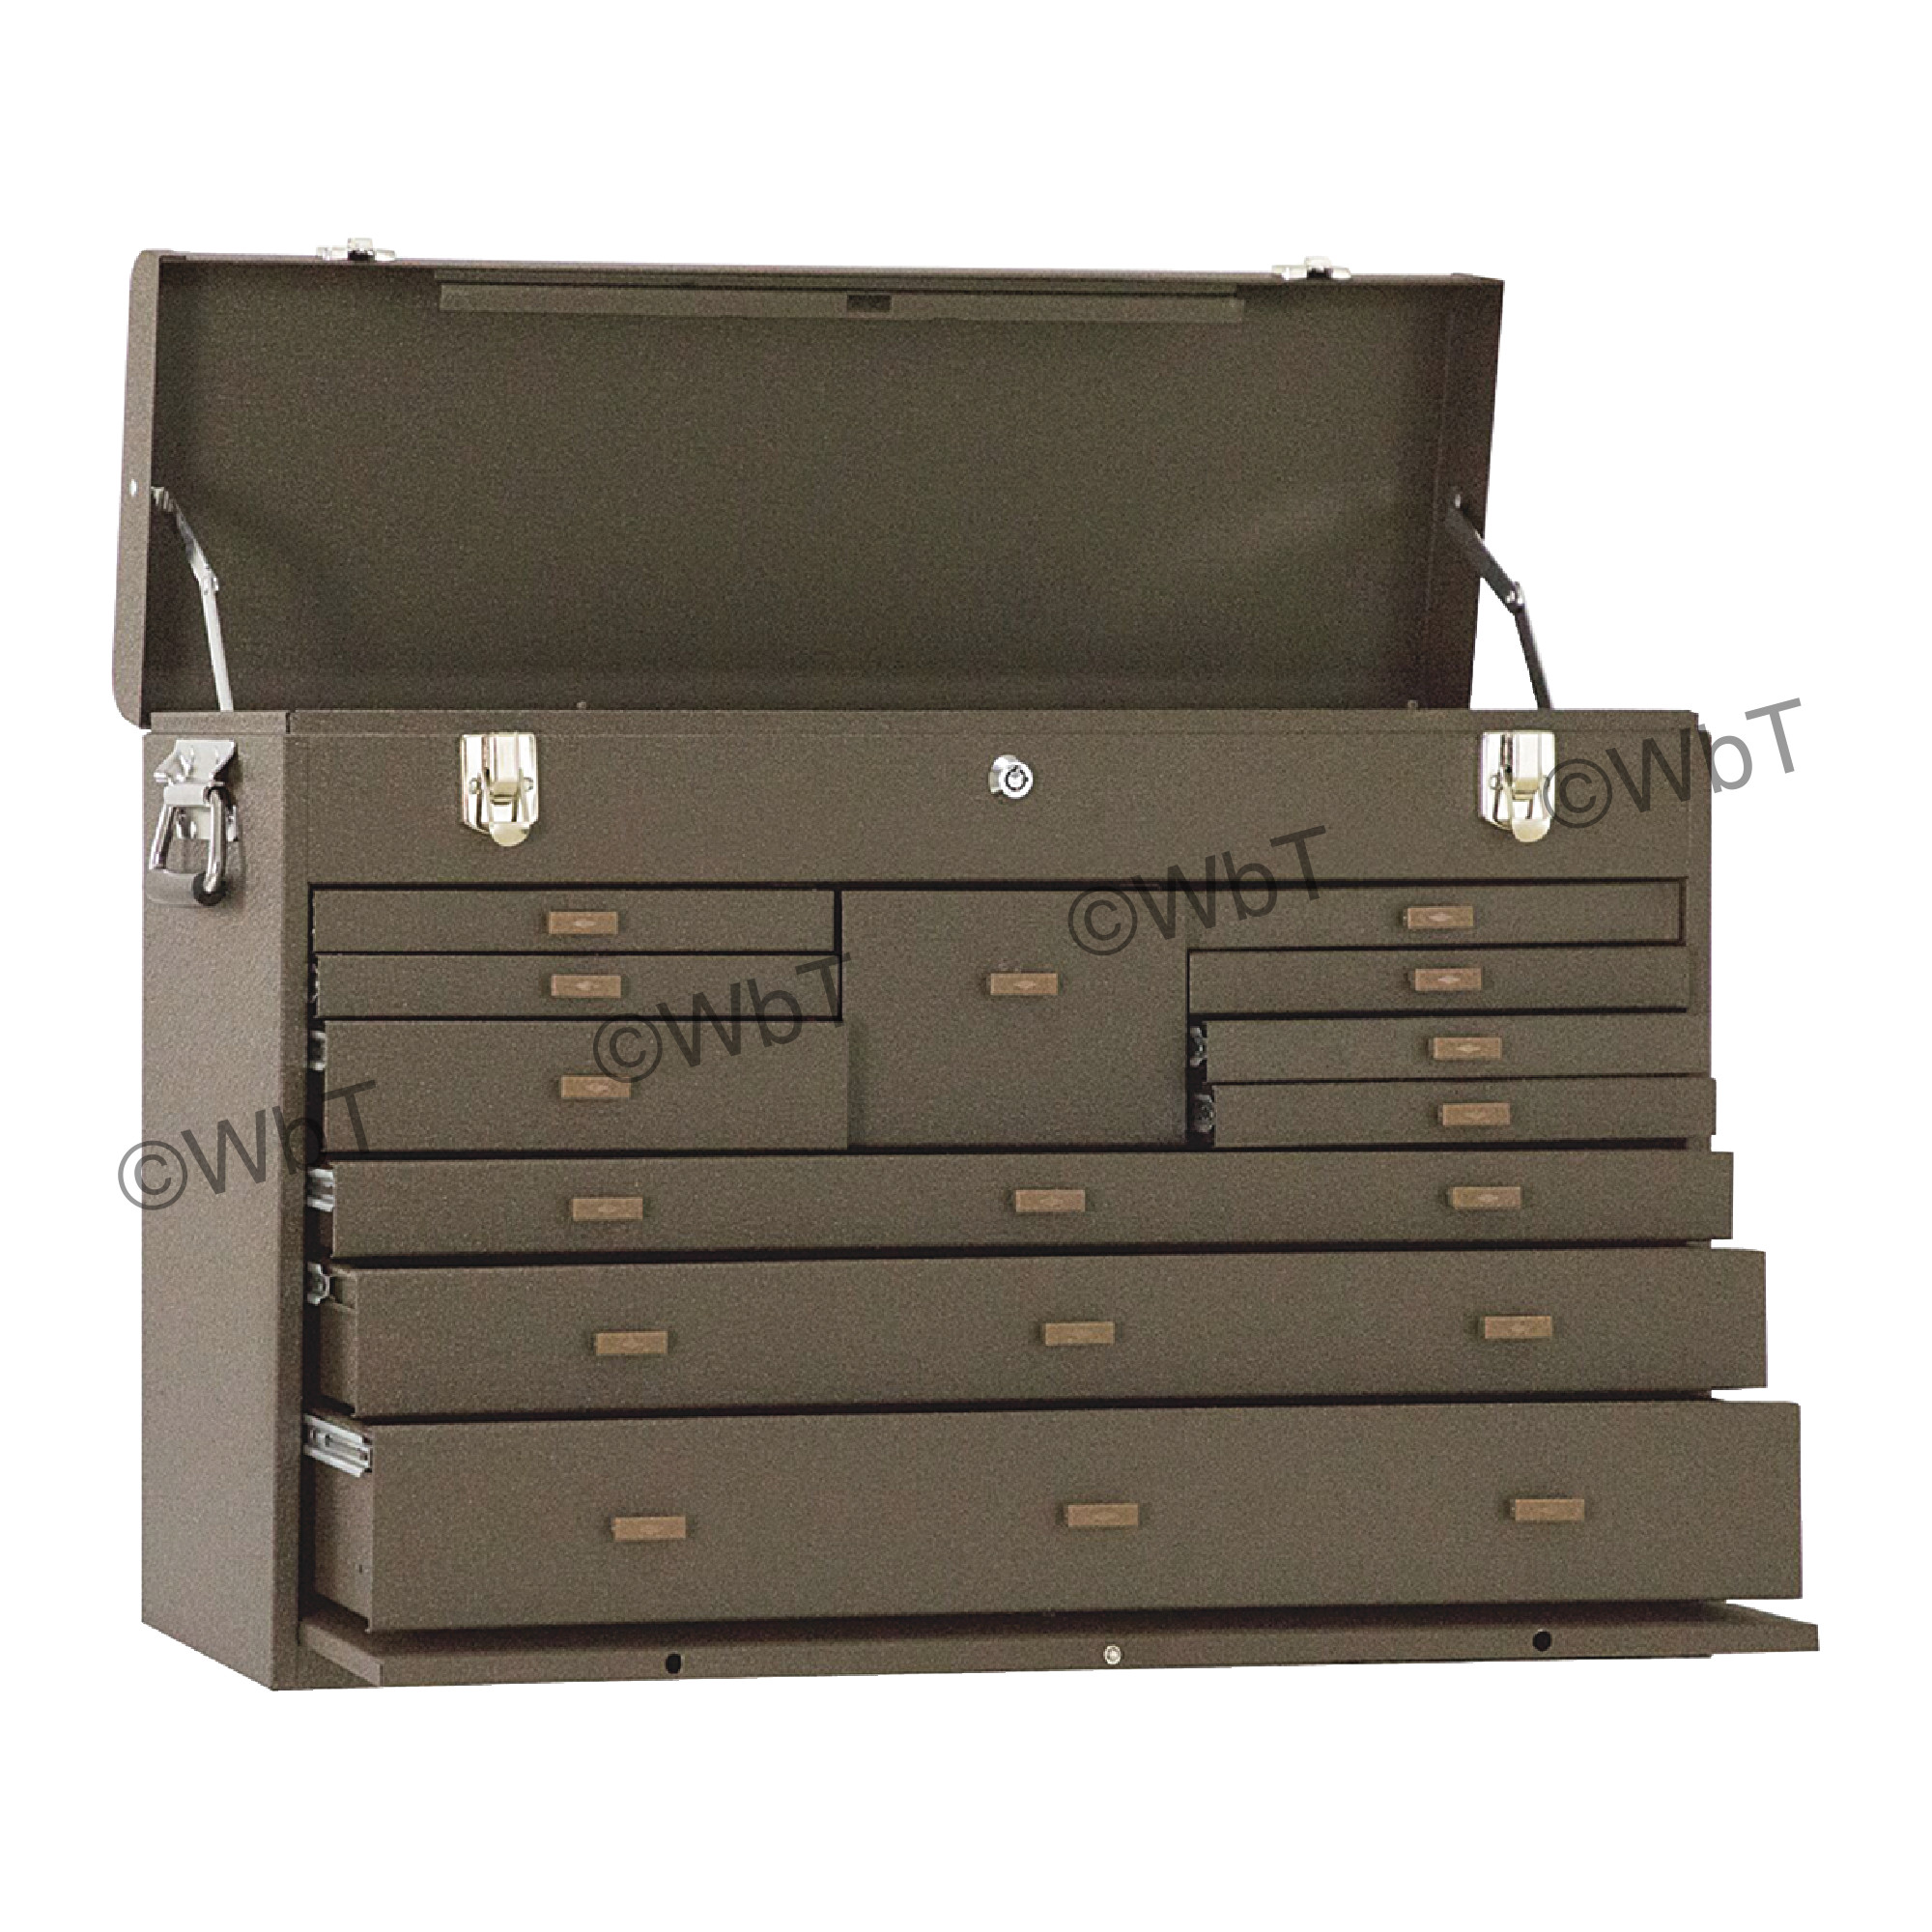 11 Drawer Machinists' Chest